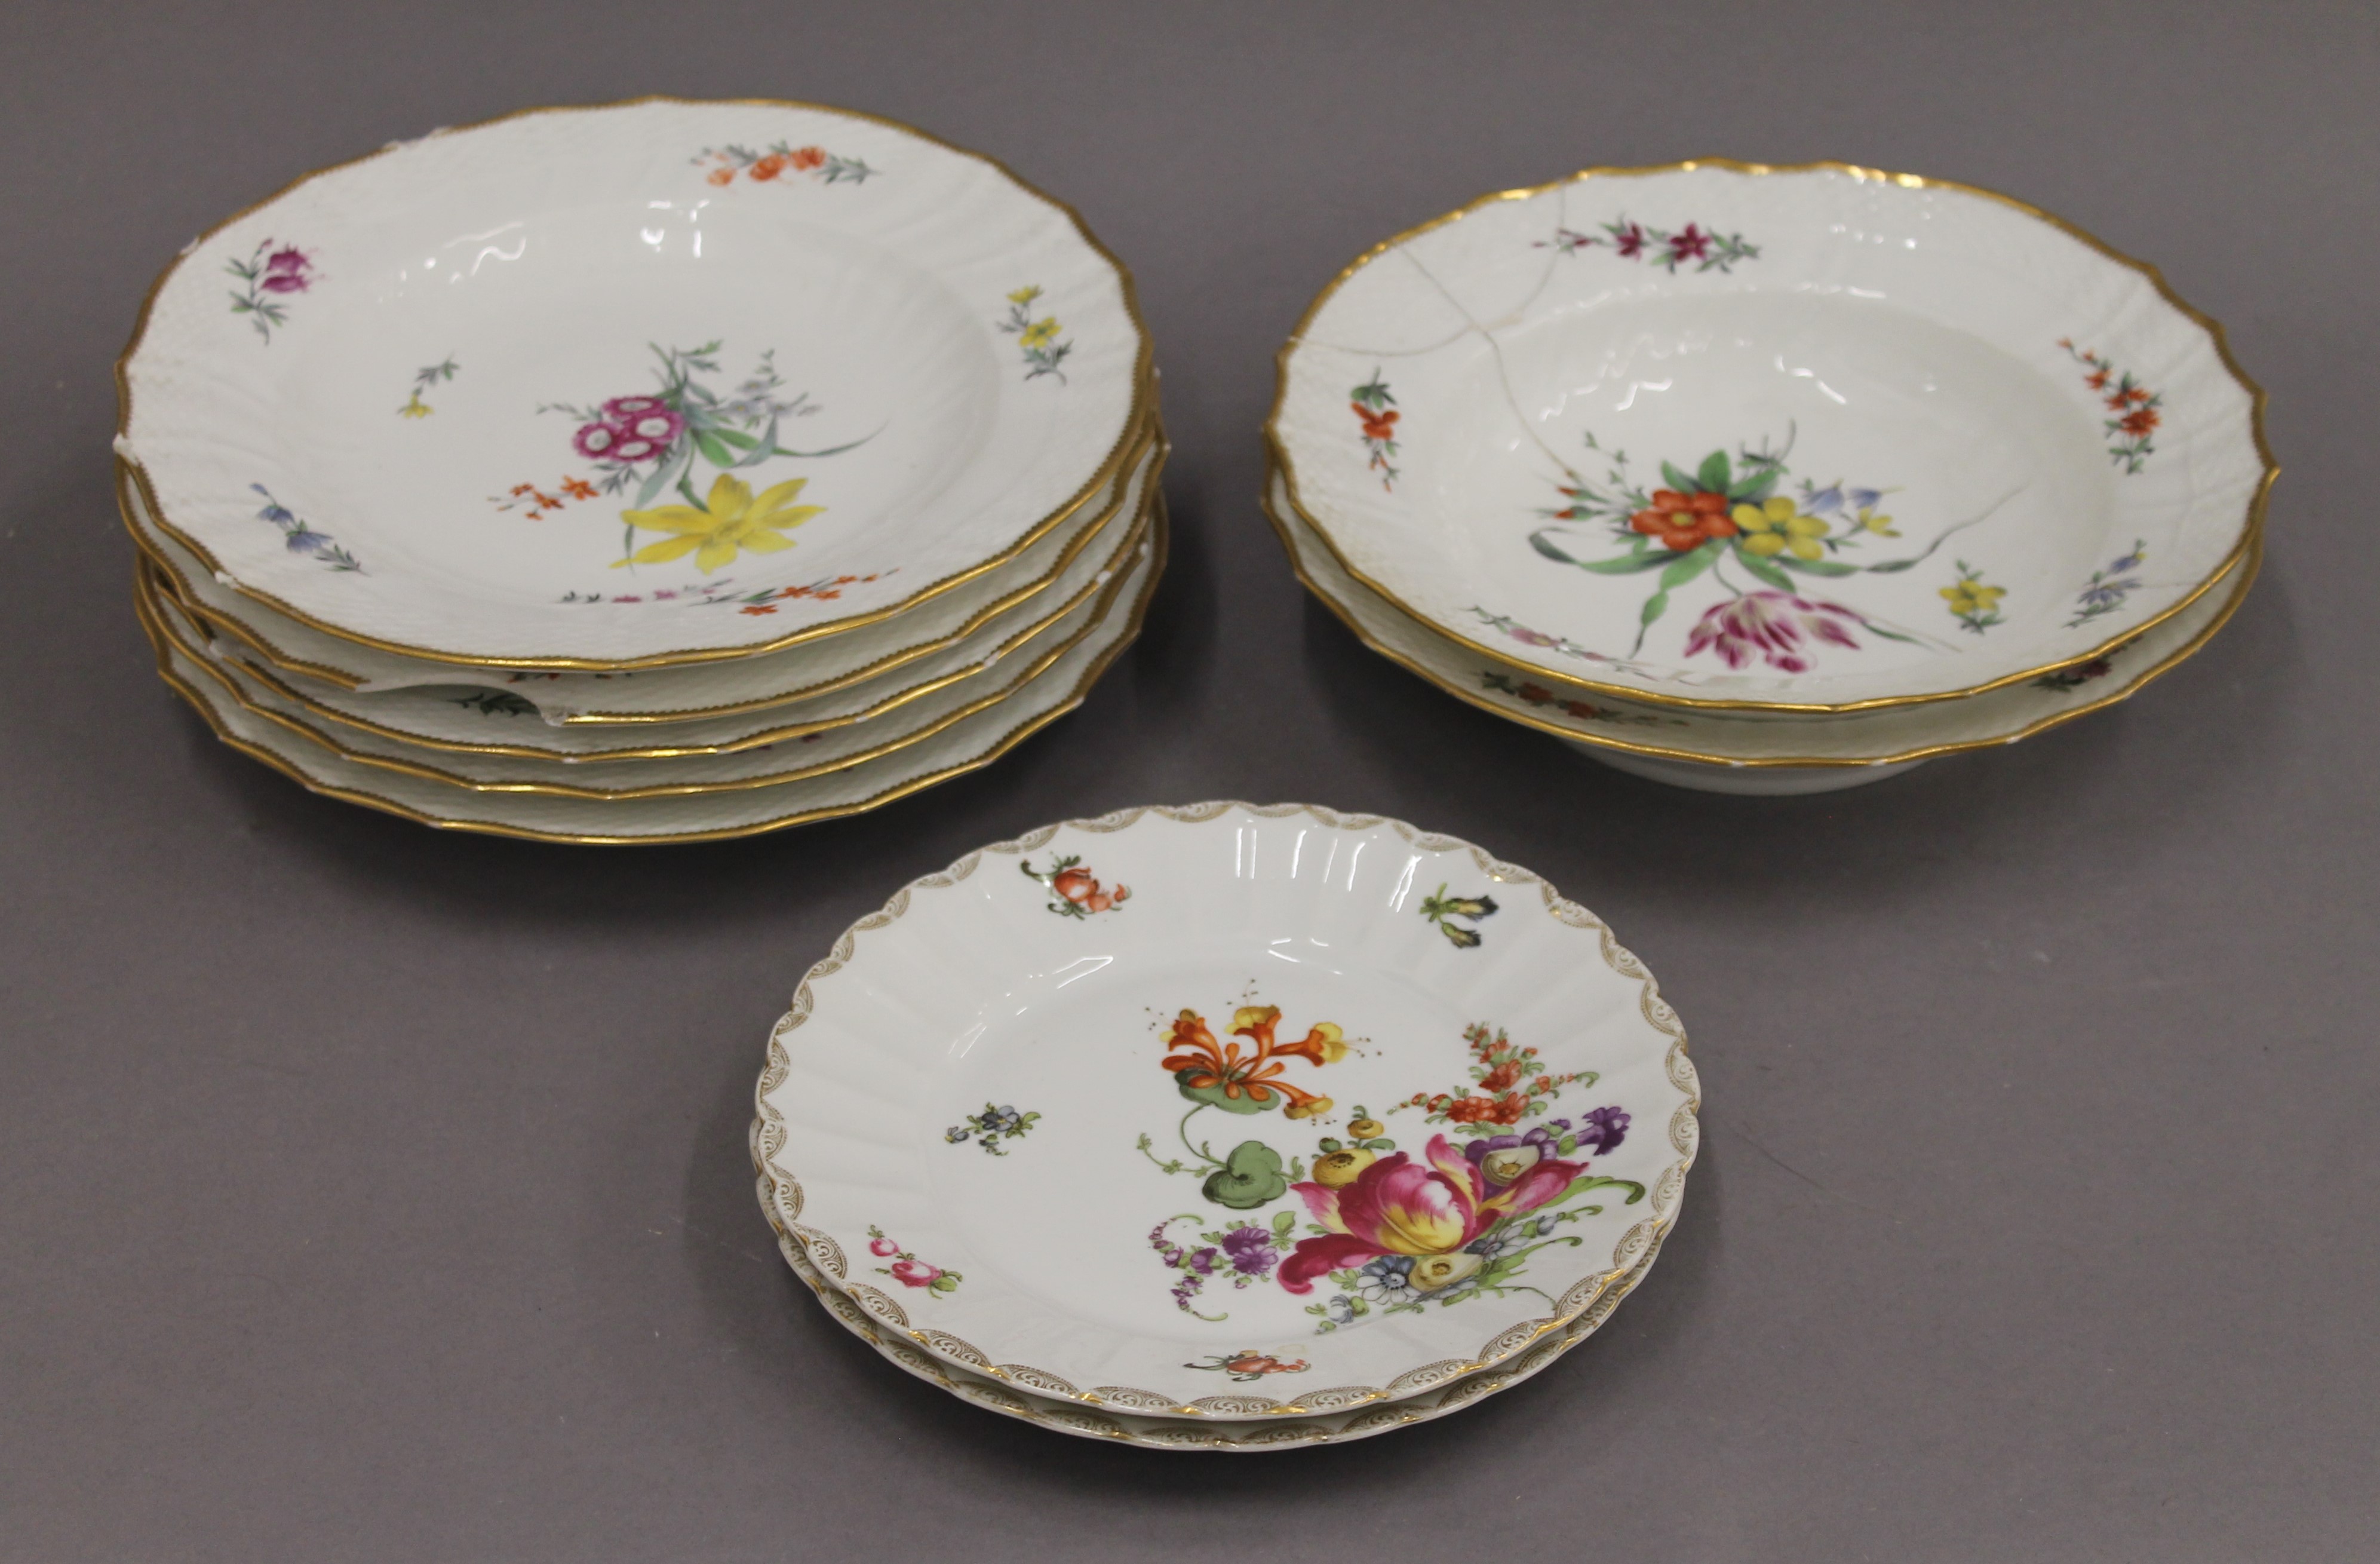 A quantity of Copenhagen porcelain florally decorated plates and dishes.